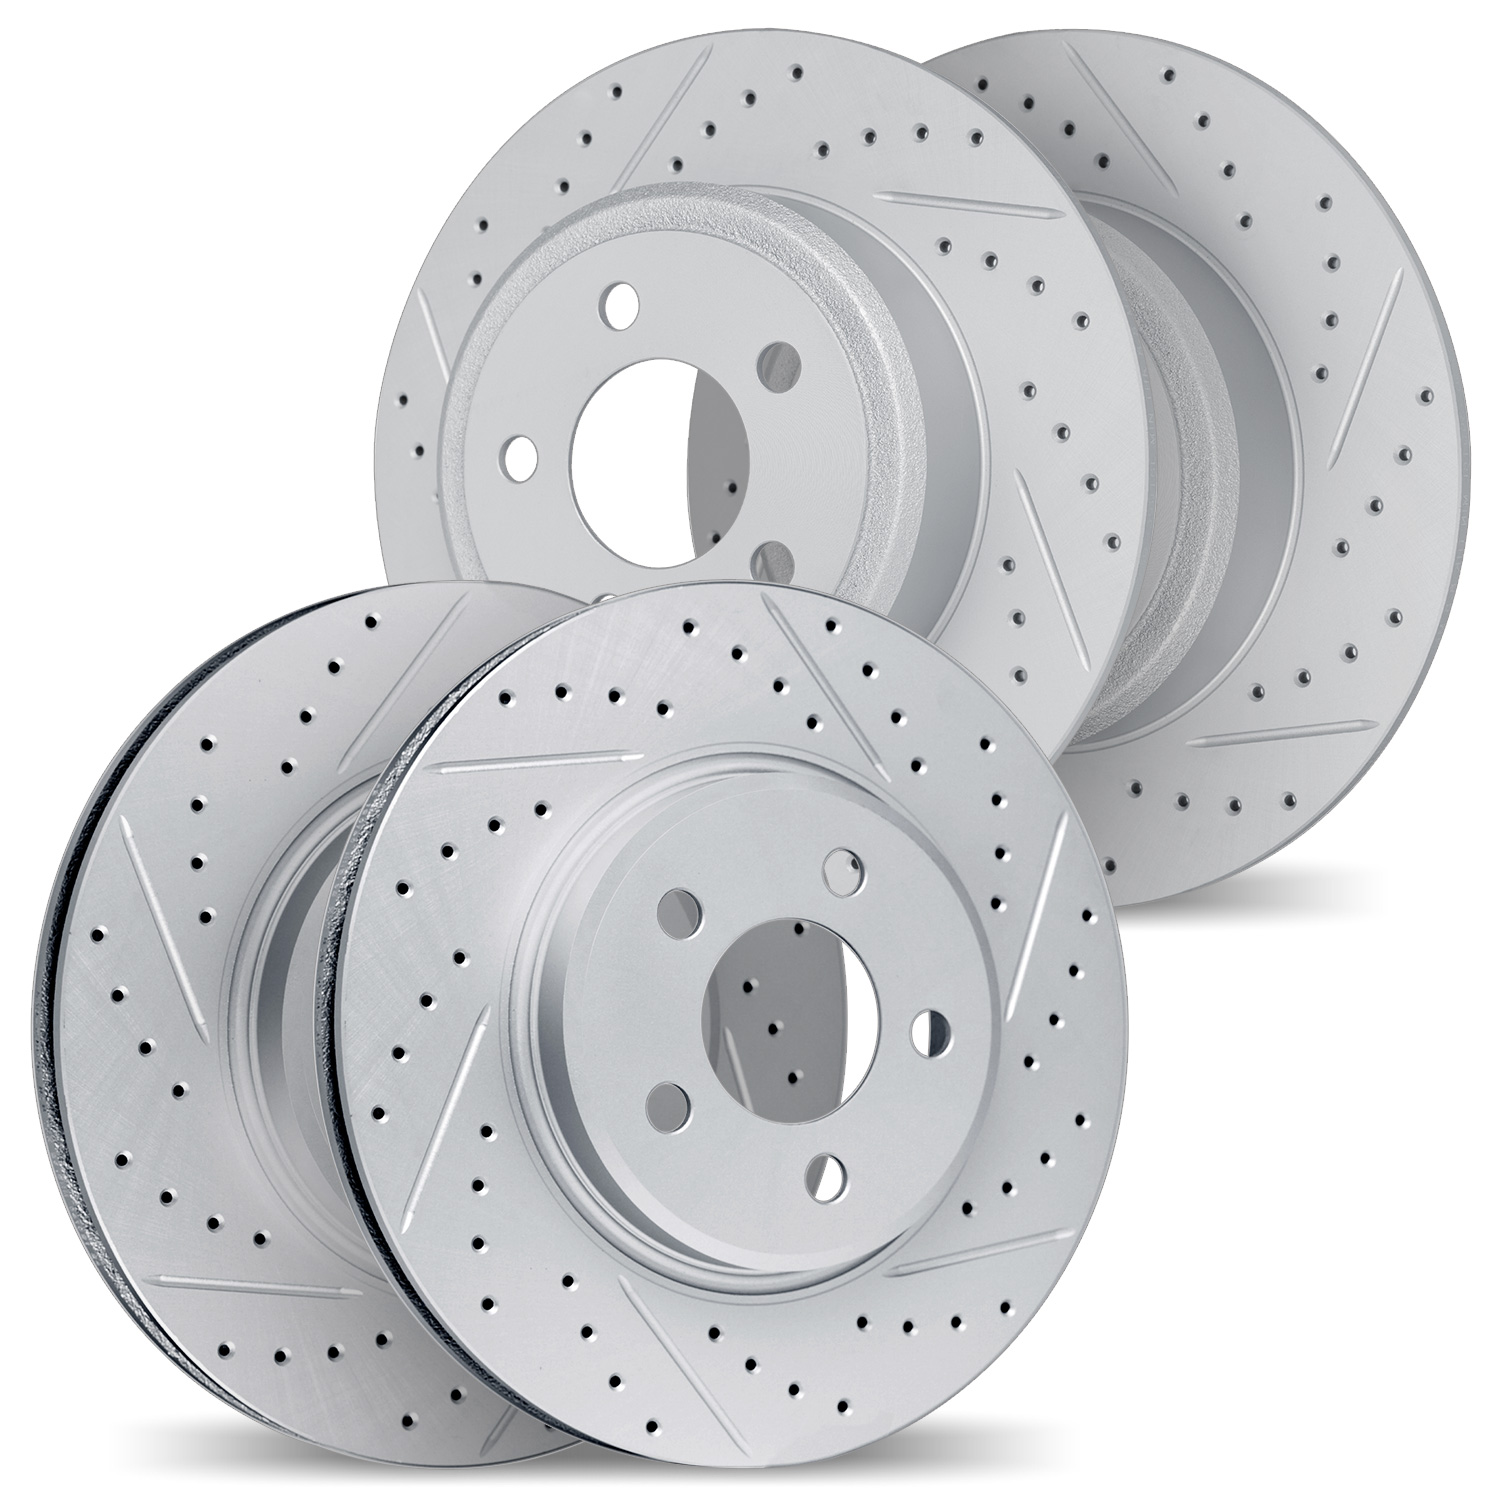 2004-27002 Geoperformance Drilled/Slotted Brake Rotors, 1976-1993 Volvo, Position: Front and Rear